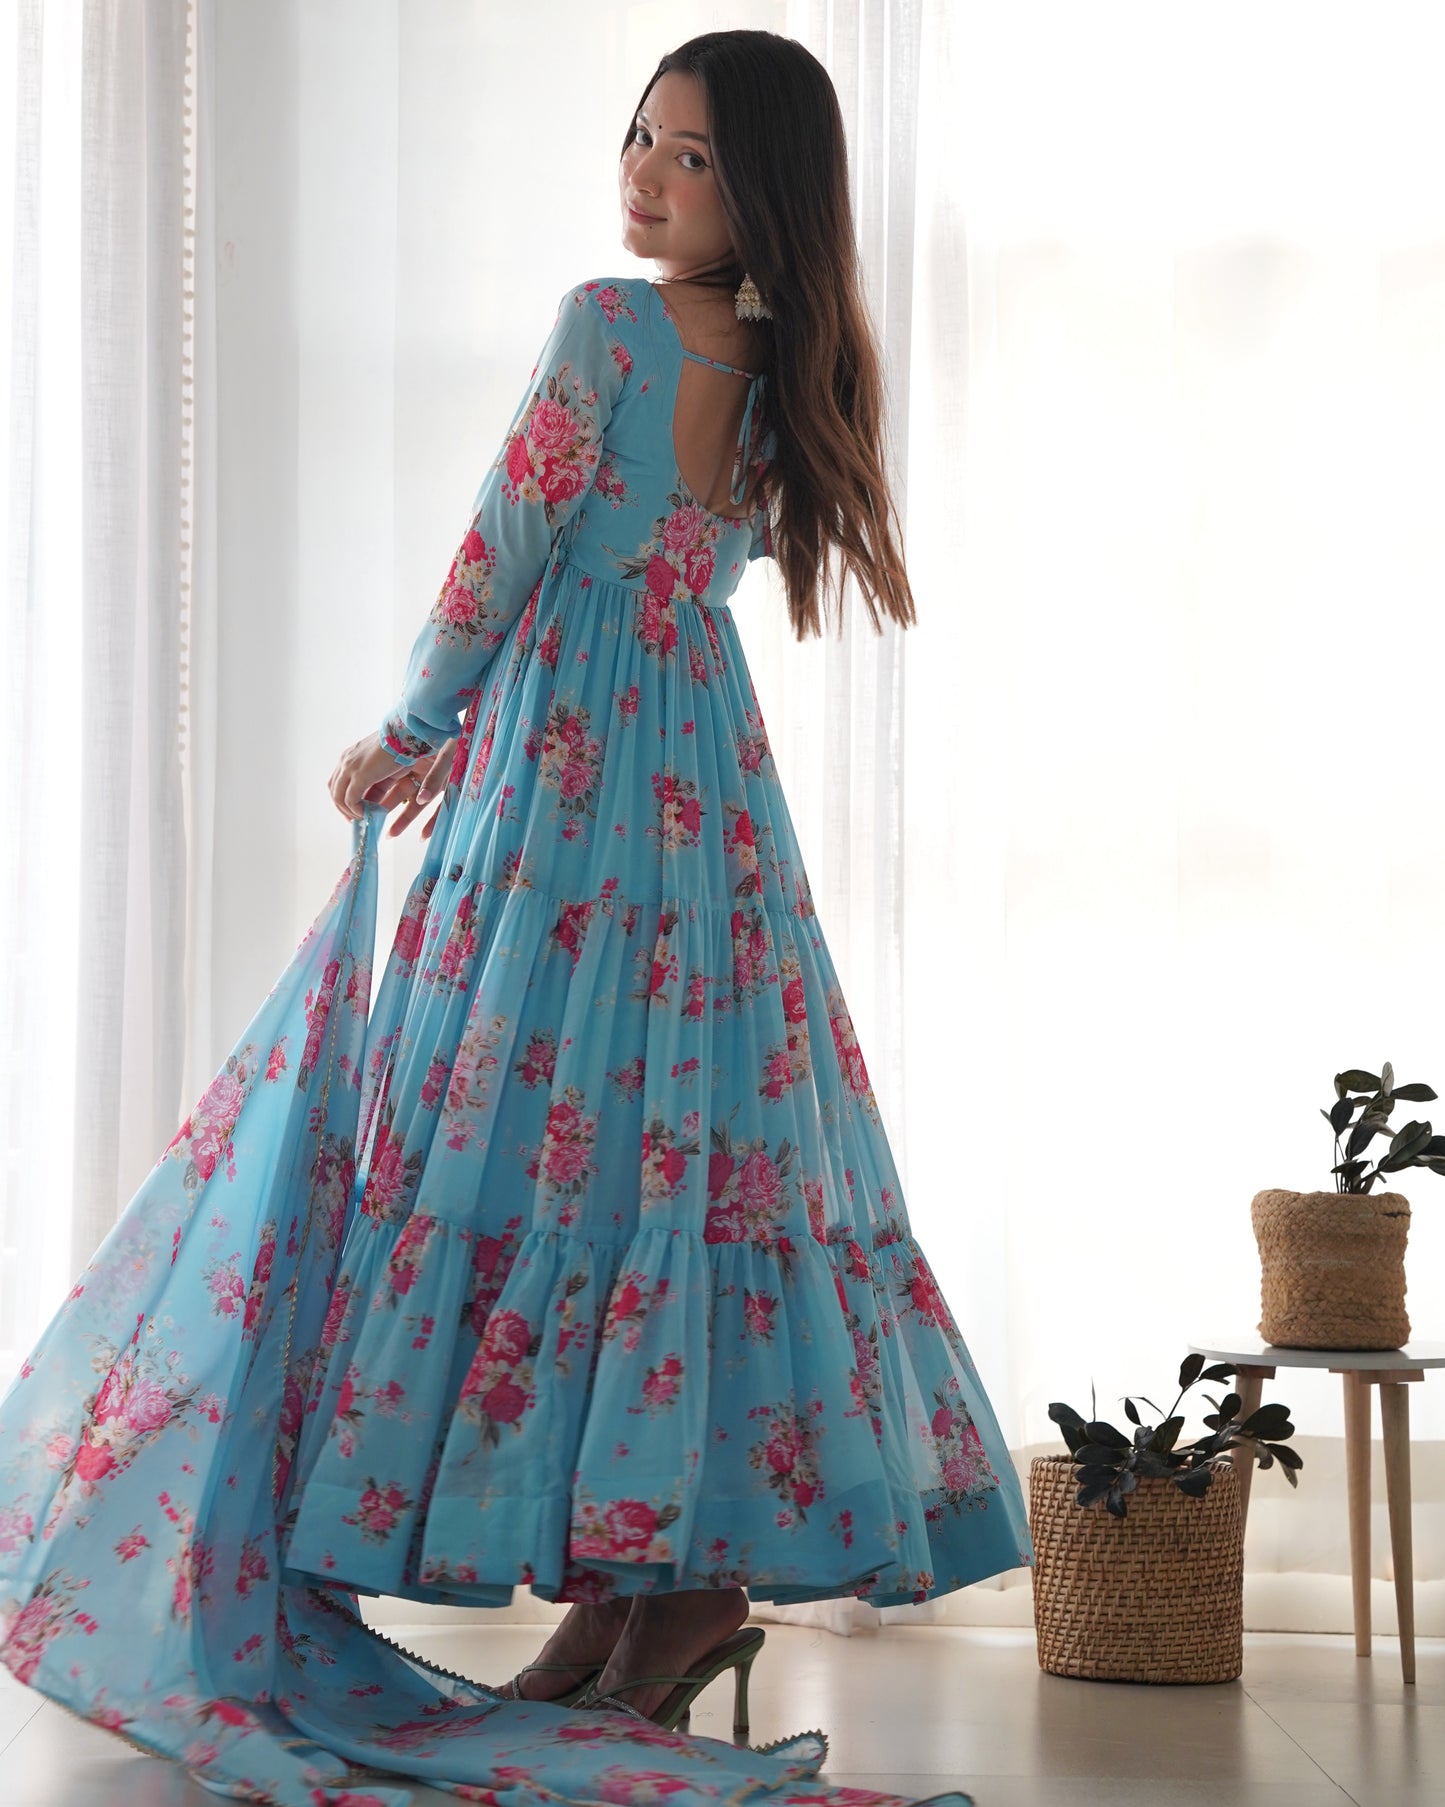 Perfect Fully Flair Anarkali Dress Wedding & Festivals Outfit For Girls And Women